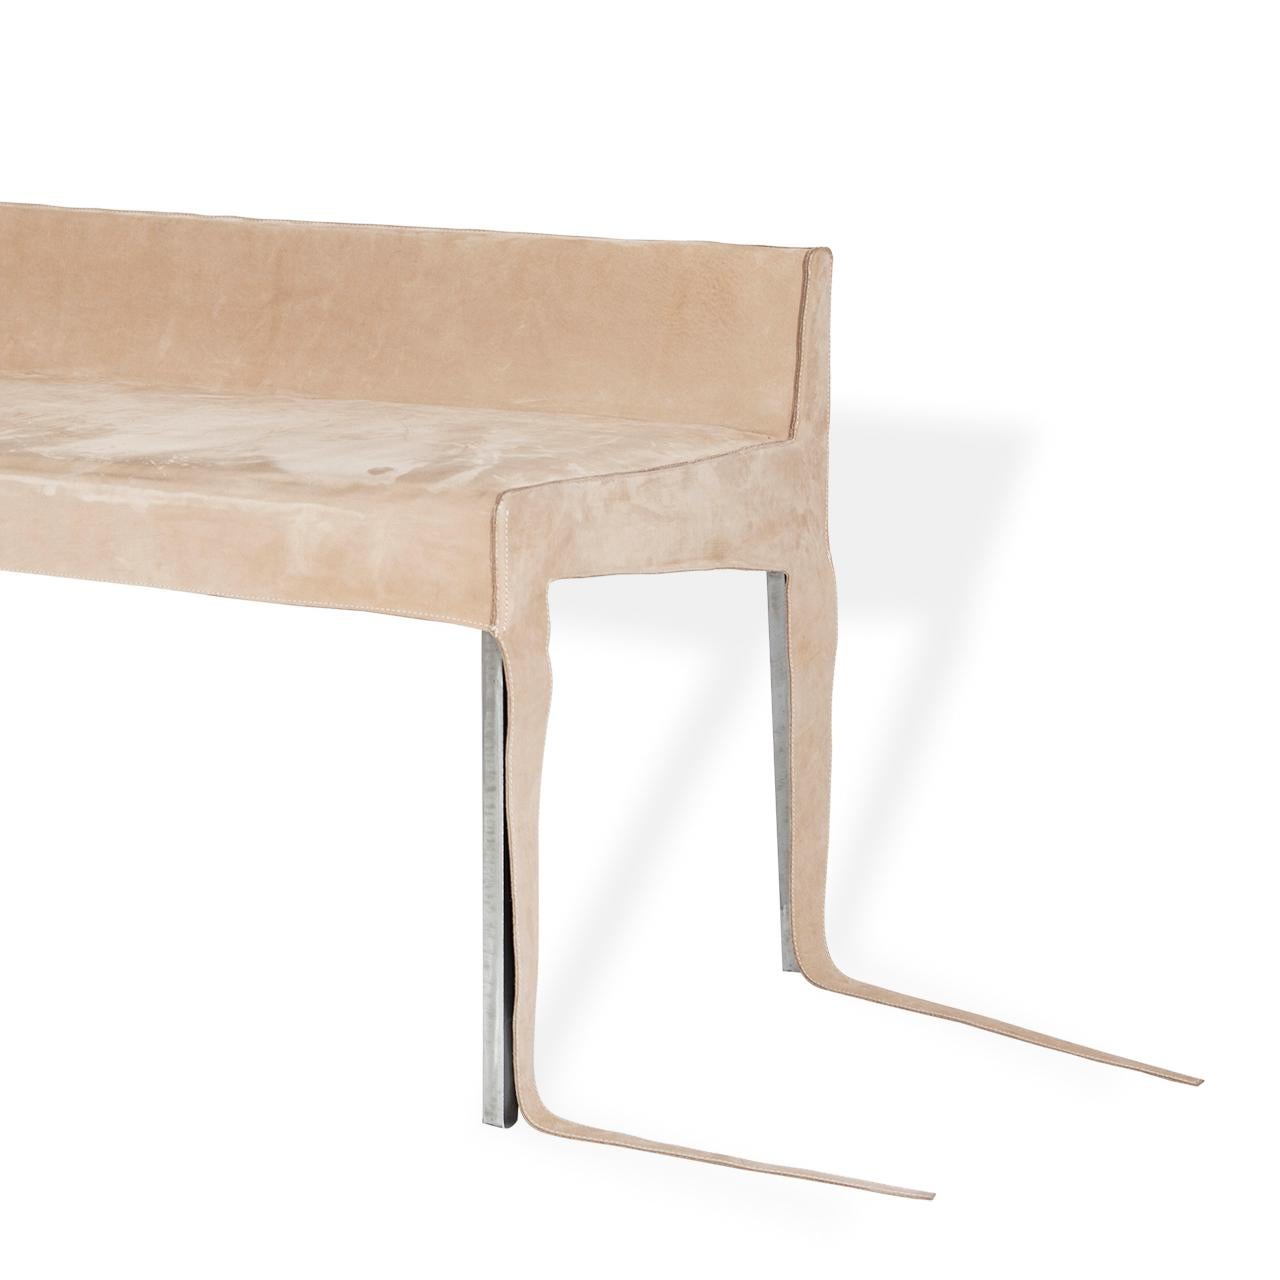 Modern Handcrafted Removable Suede Covered Metal Design Bench